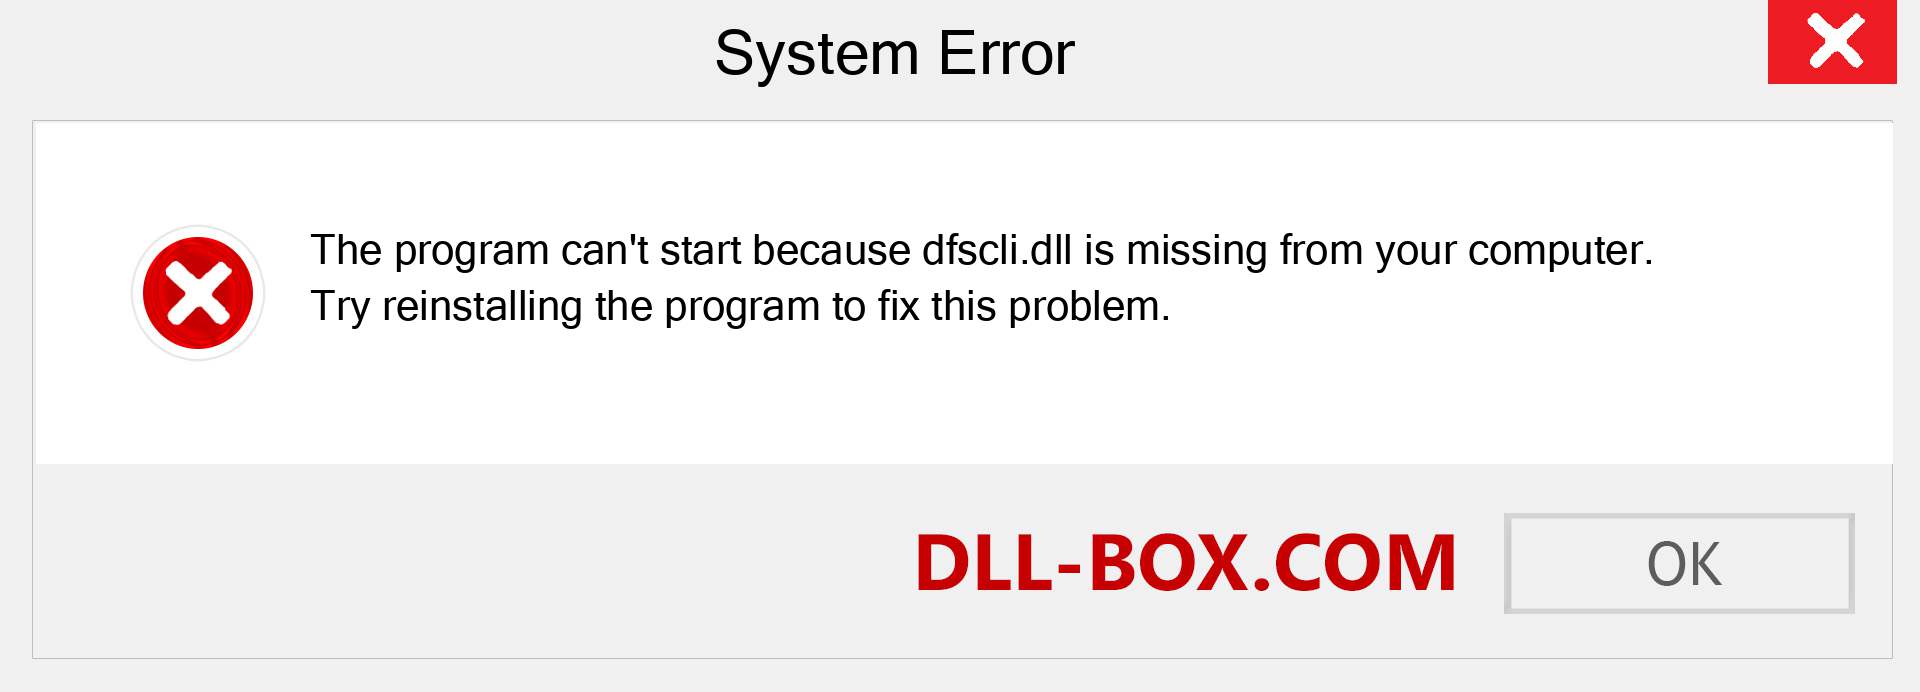  dfscli.dll file is missing?. Download for Windows 7, 8, 10 - Fix  dfscli dll Missing Error on Windows, photos, images